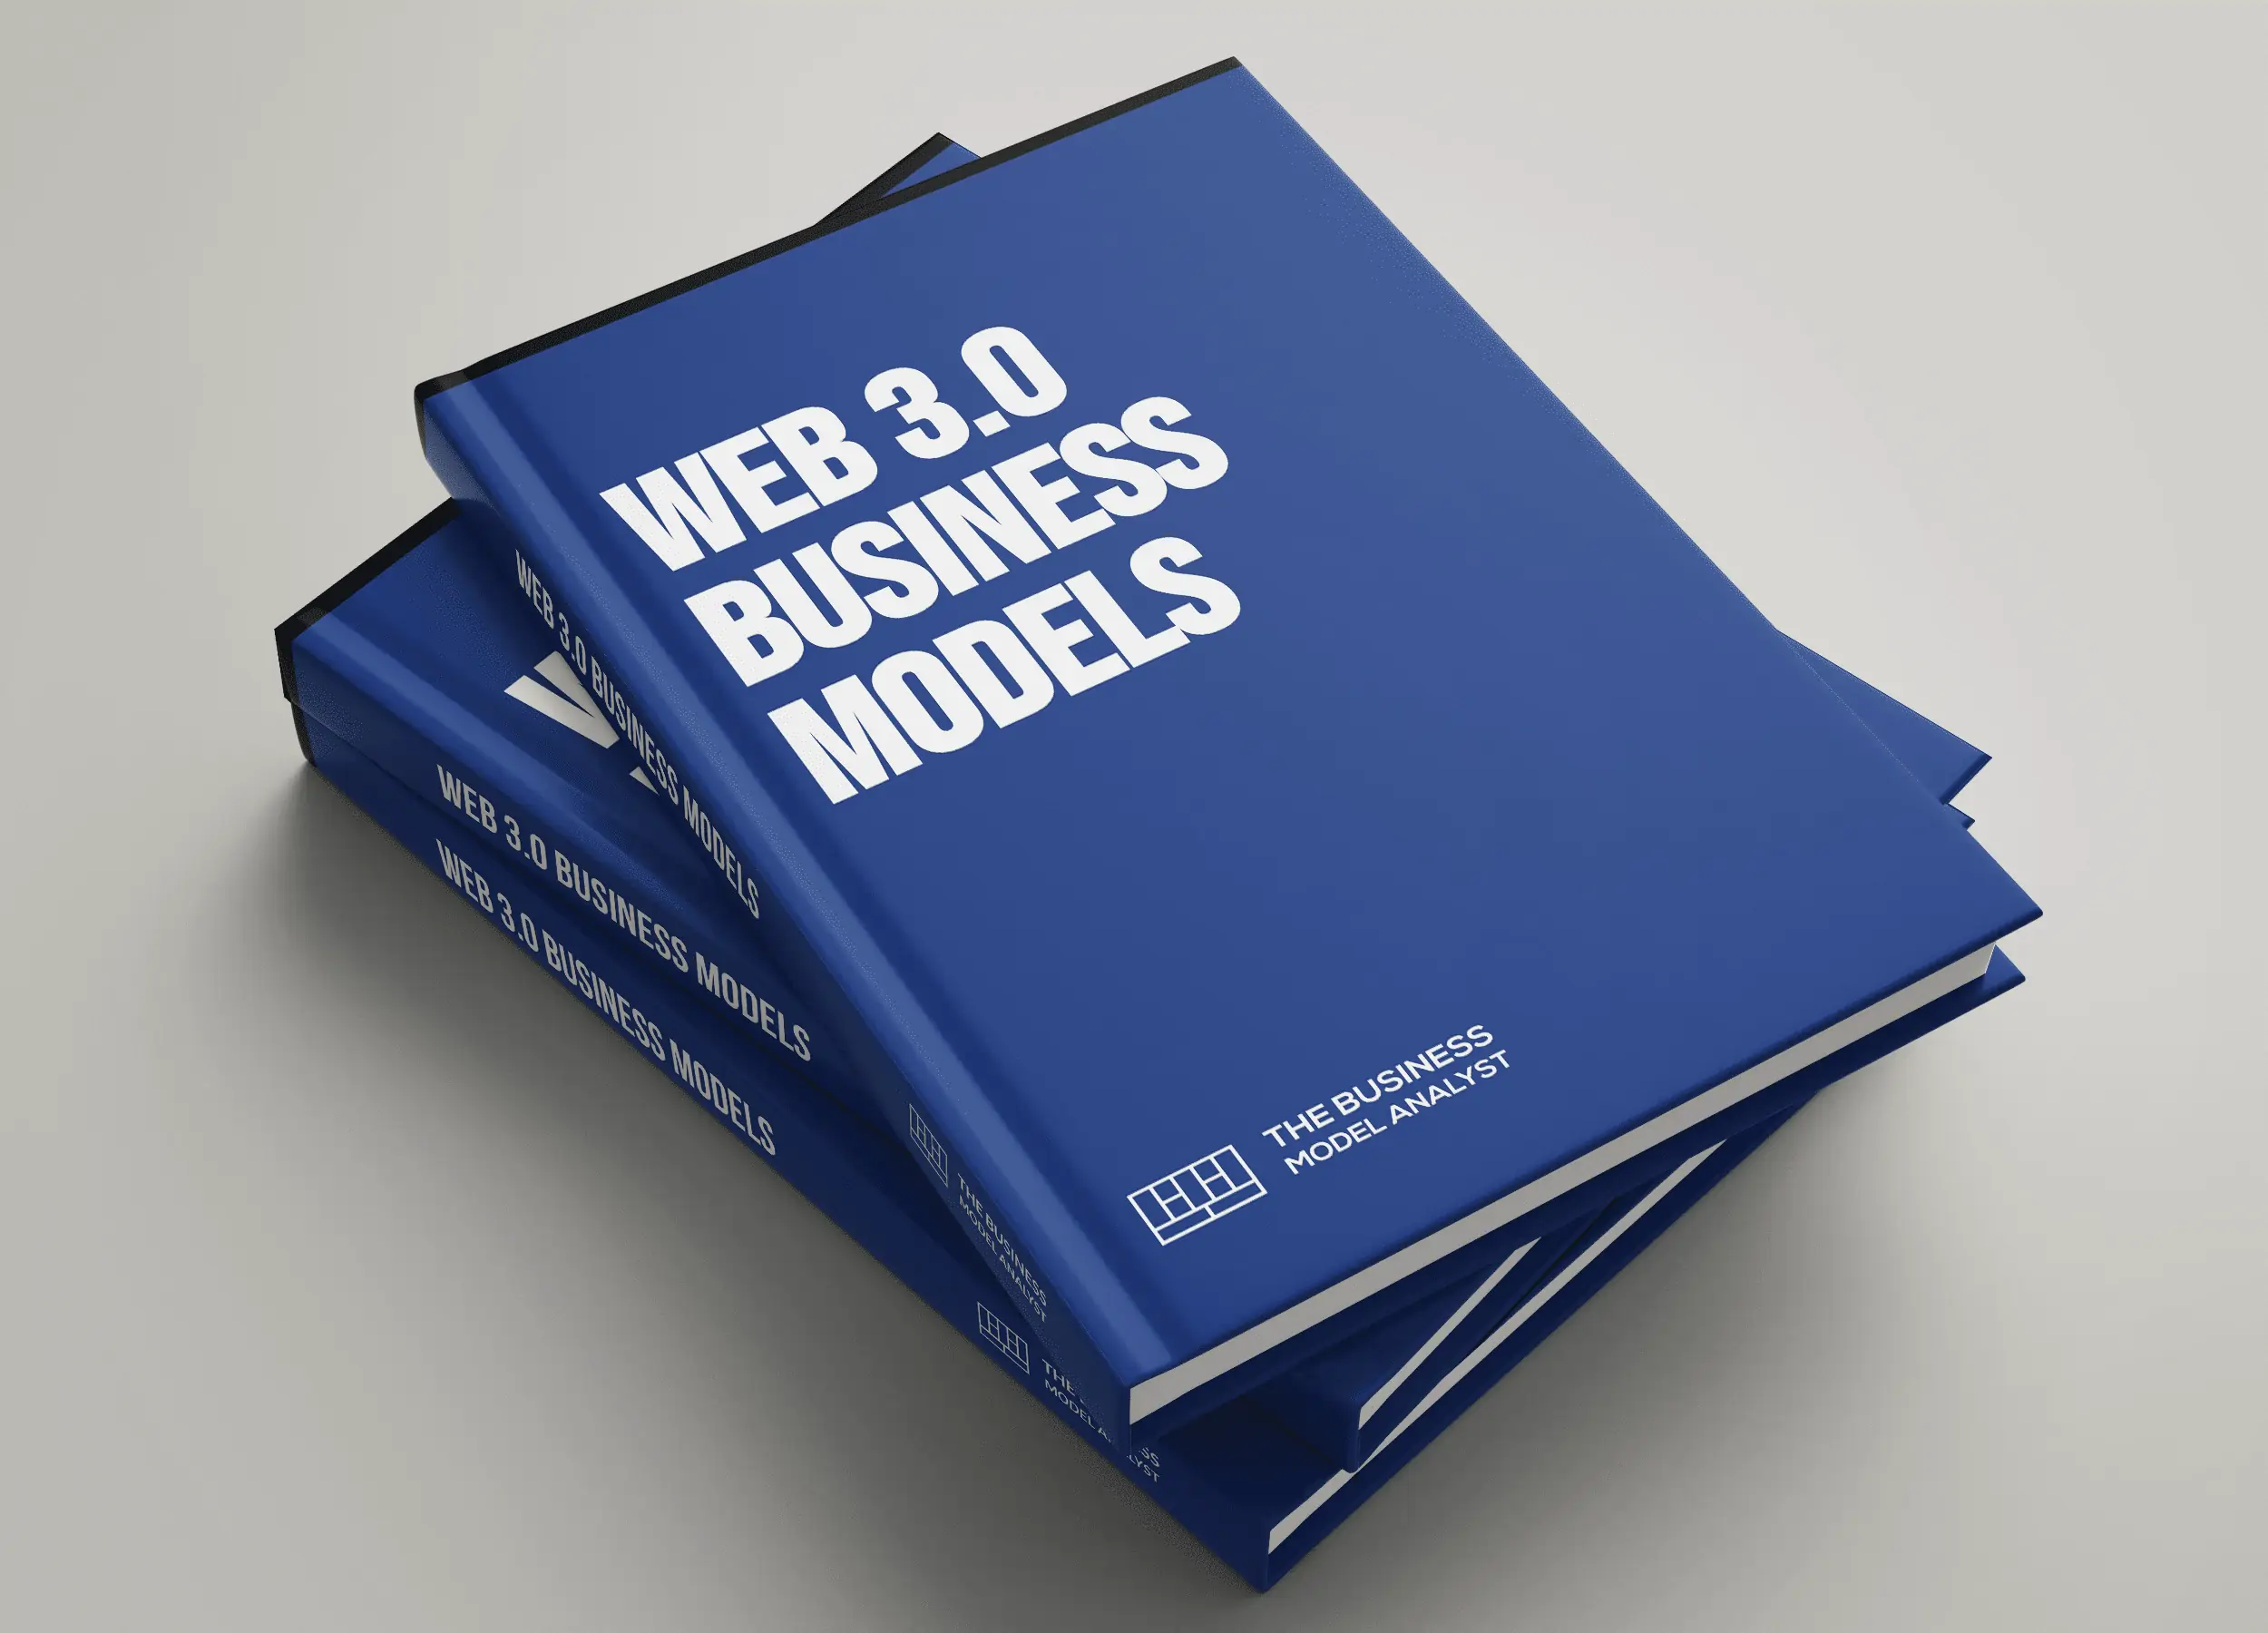 Web 3.0 Business Models Covers